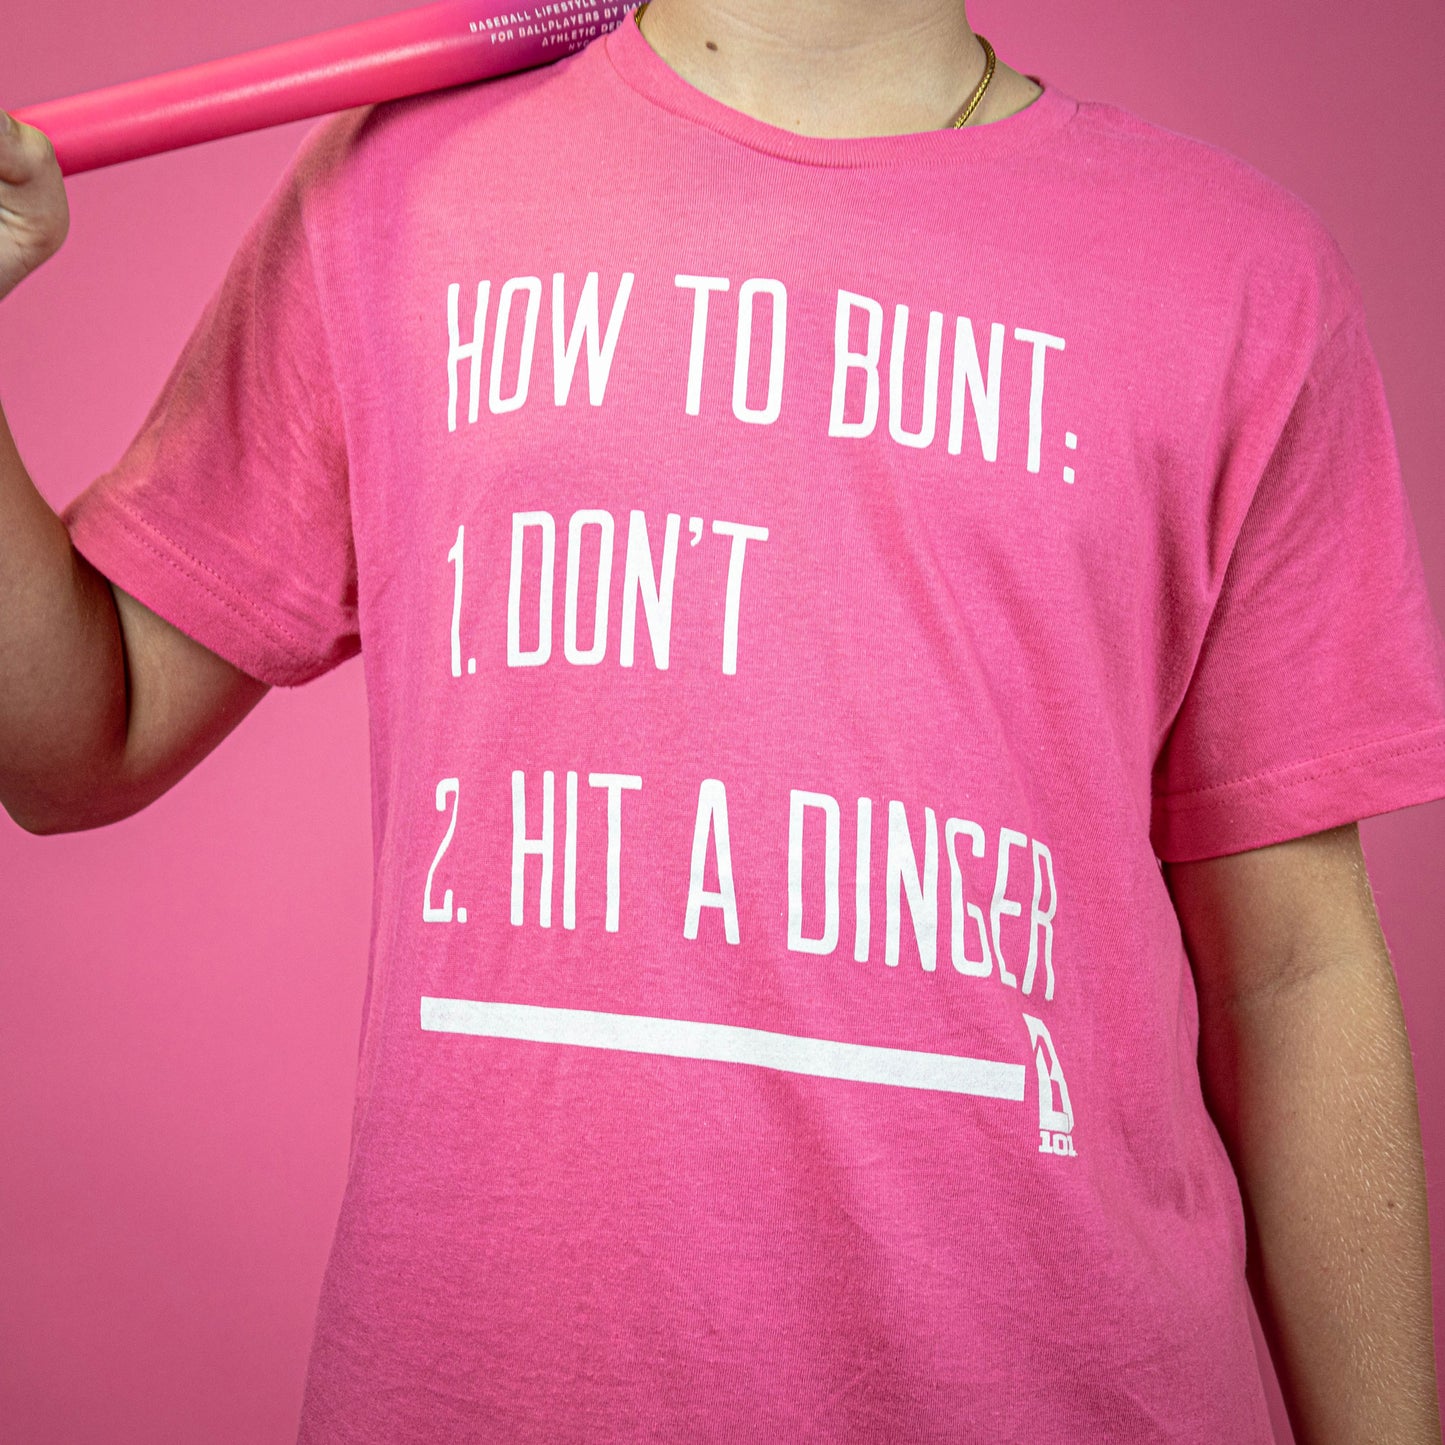 How to Bunt Youth Tee - Pink/White